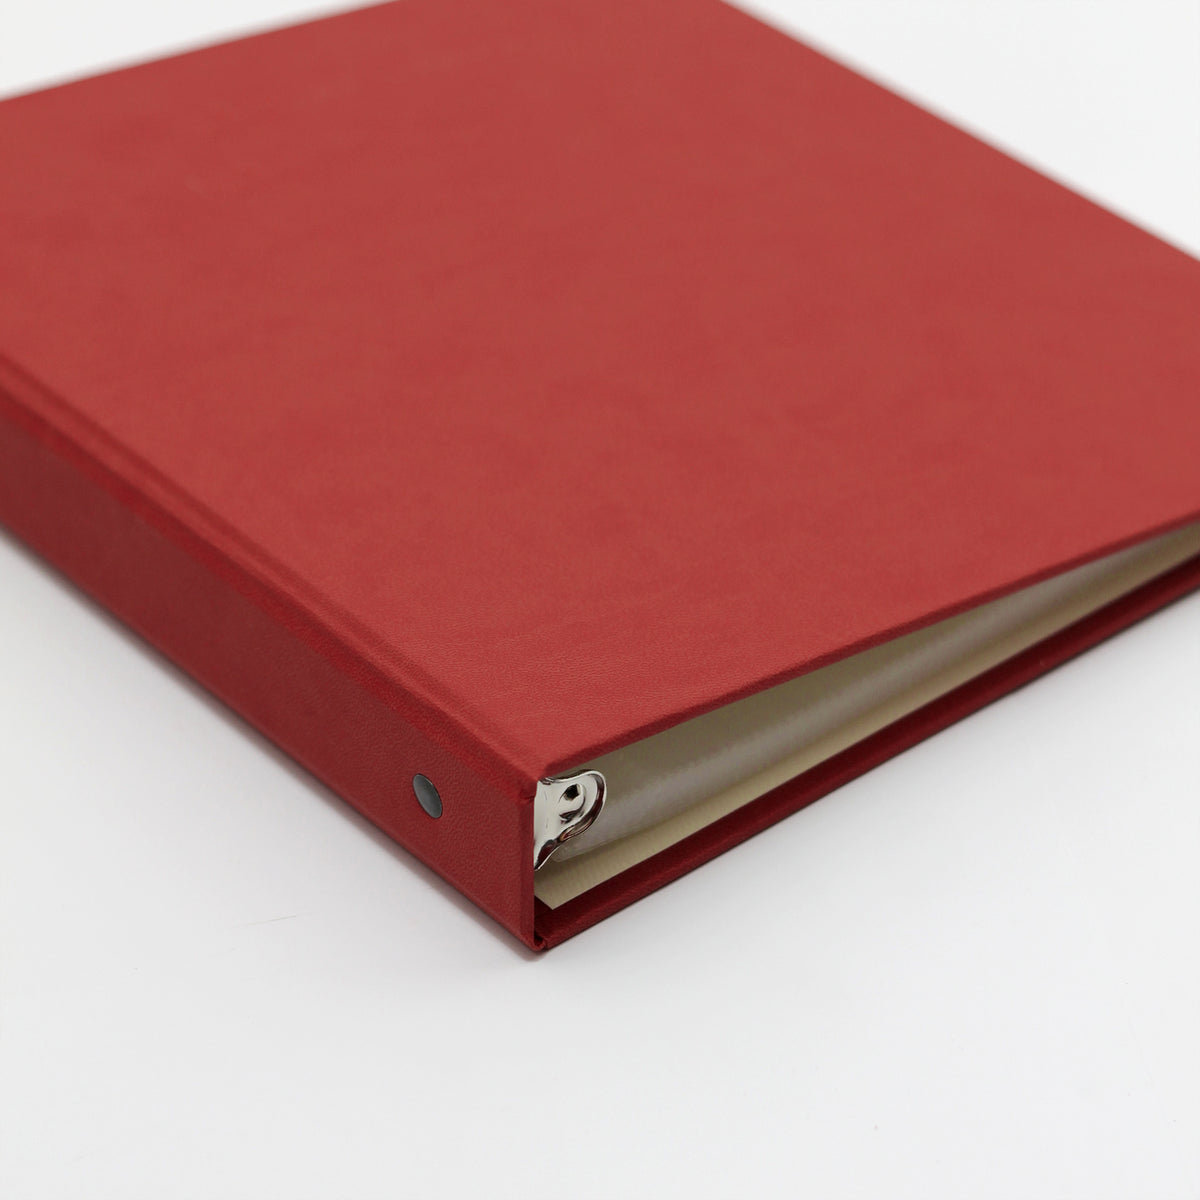 Medium Holiday Photo Binder with Red Vegan Leather Cover for 4x6 Photos